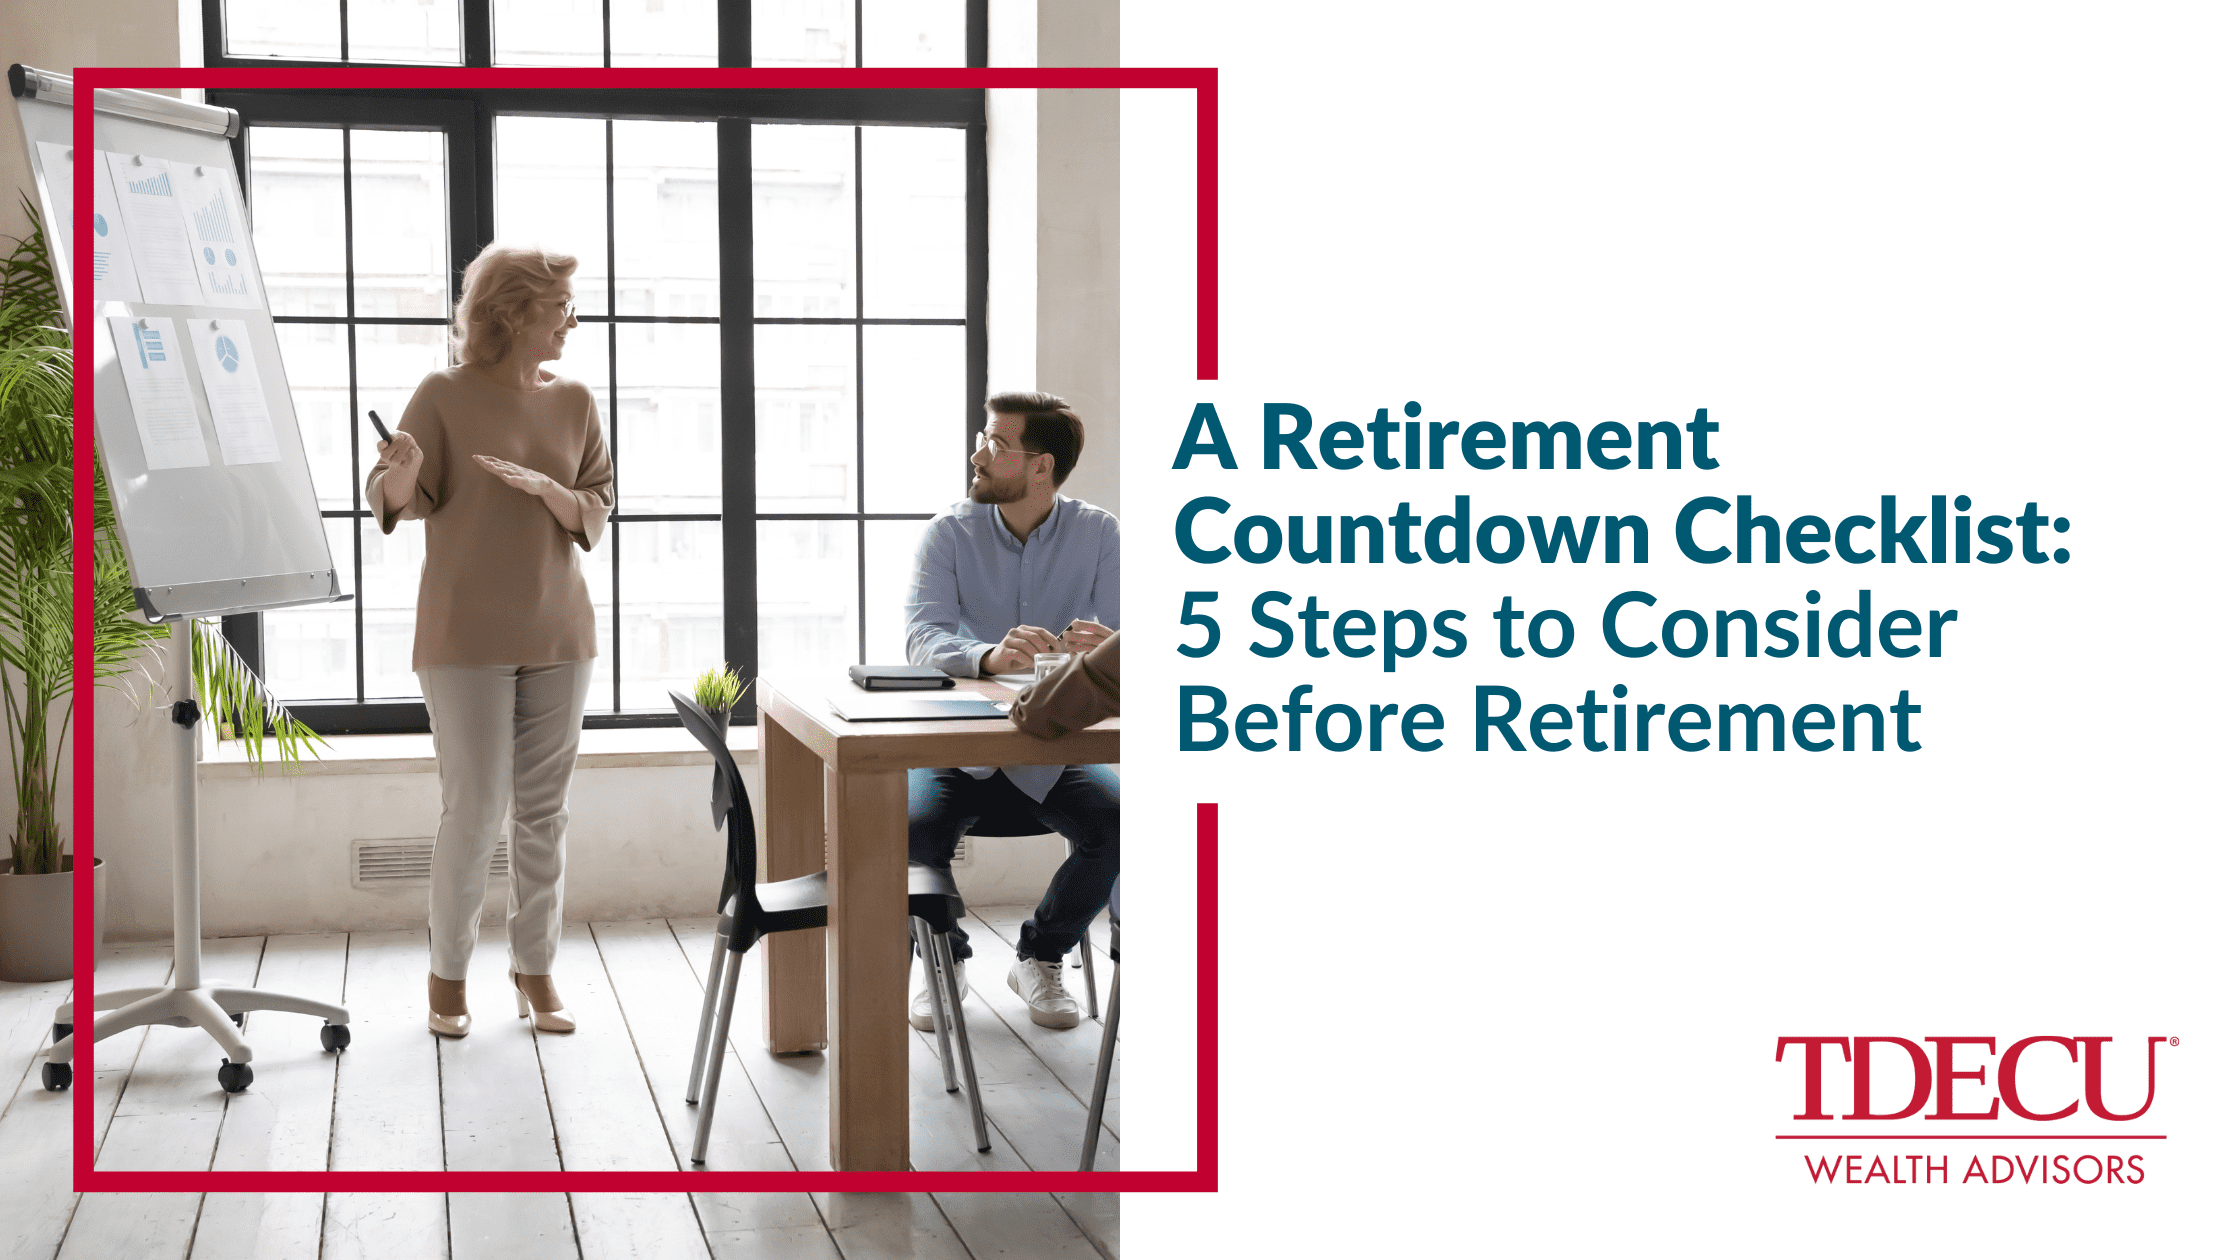 A Retirement Countdown Checklist: 5 Steps to Consider Before Retirement